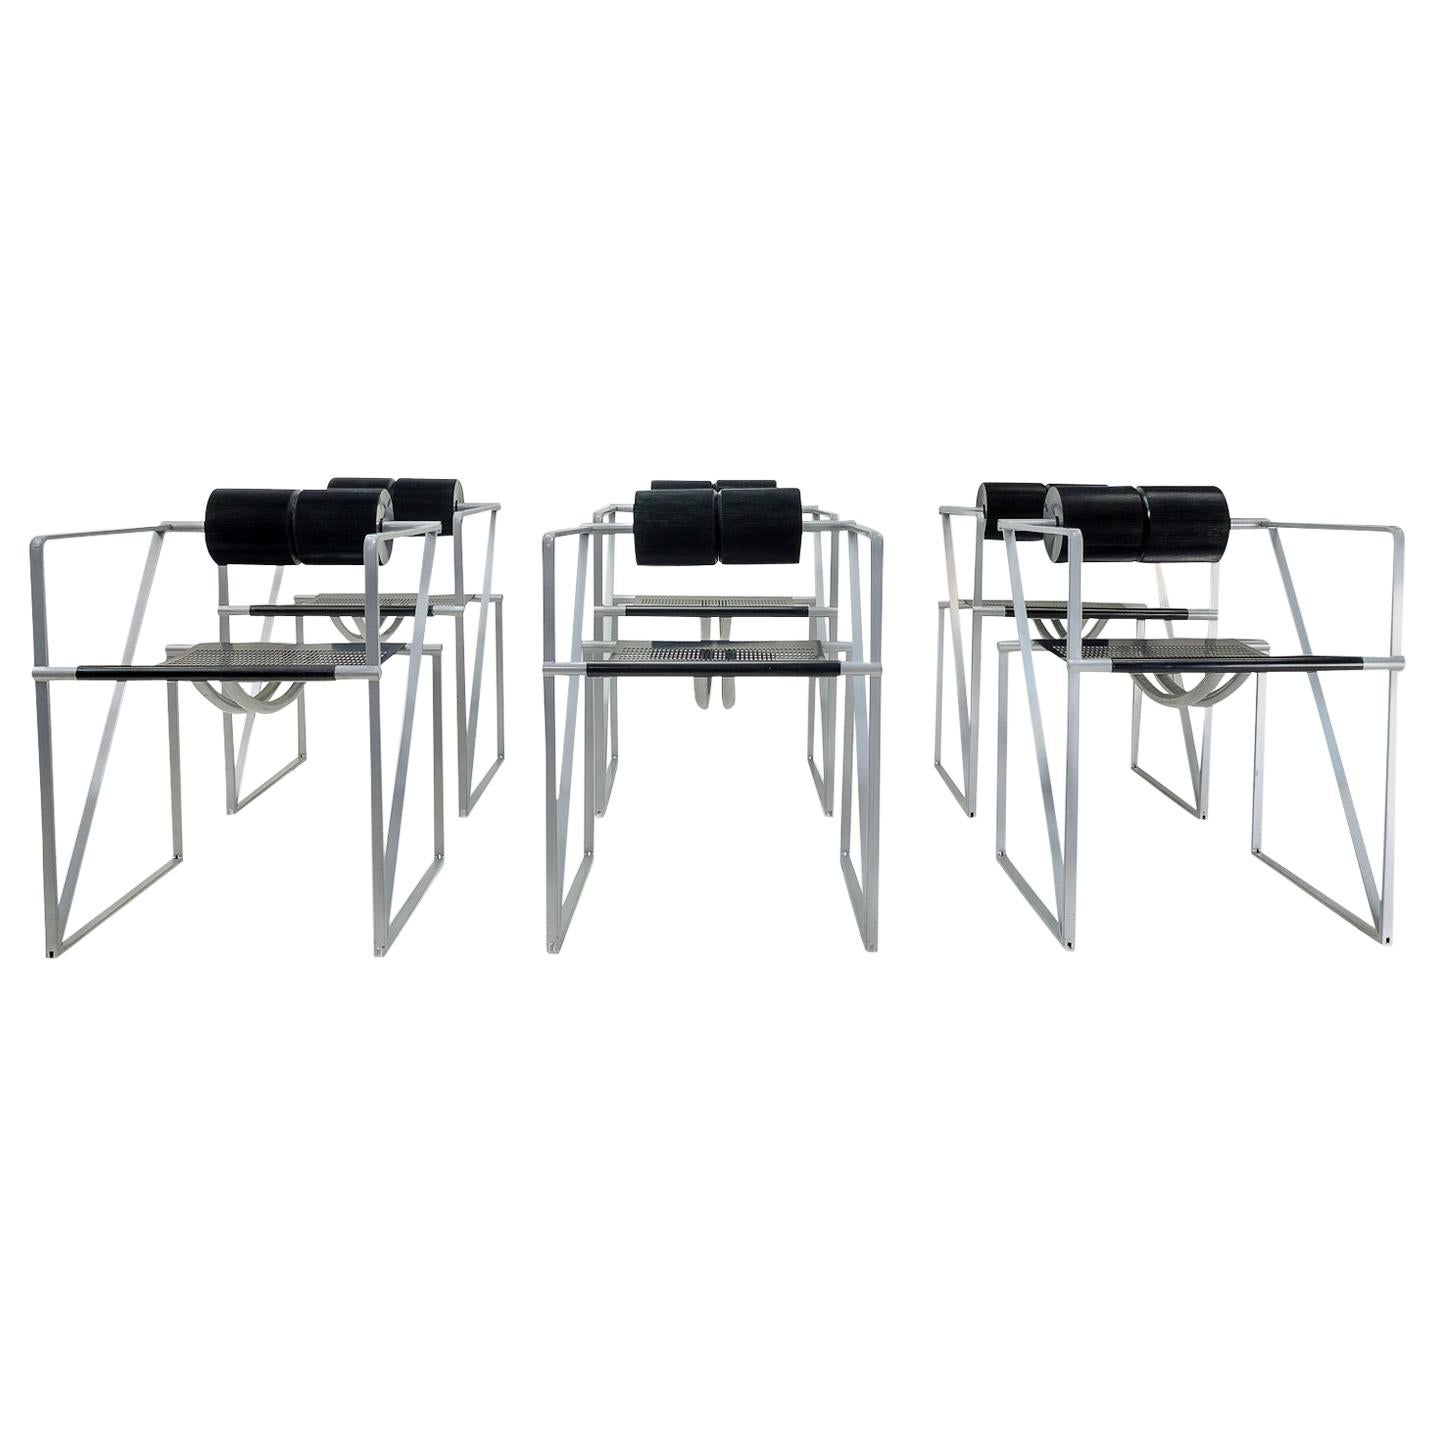 Set of 6, Seconda Chairs by Swiss Architect Mario Botta for Alias, 1980s For Sale